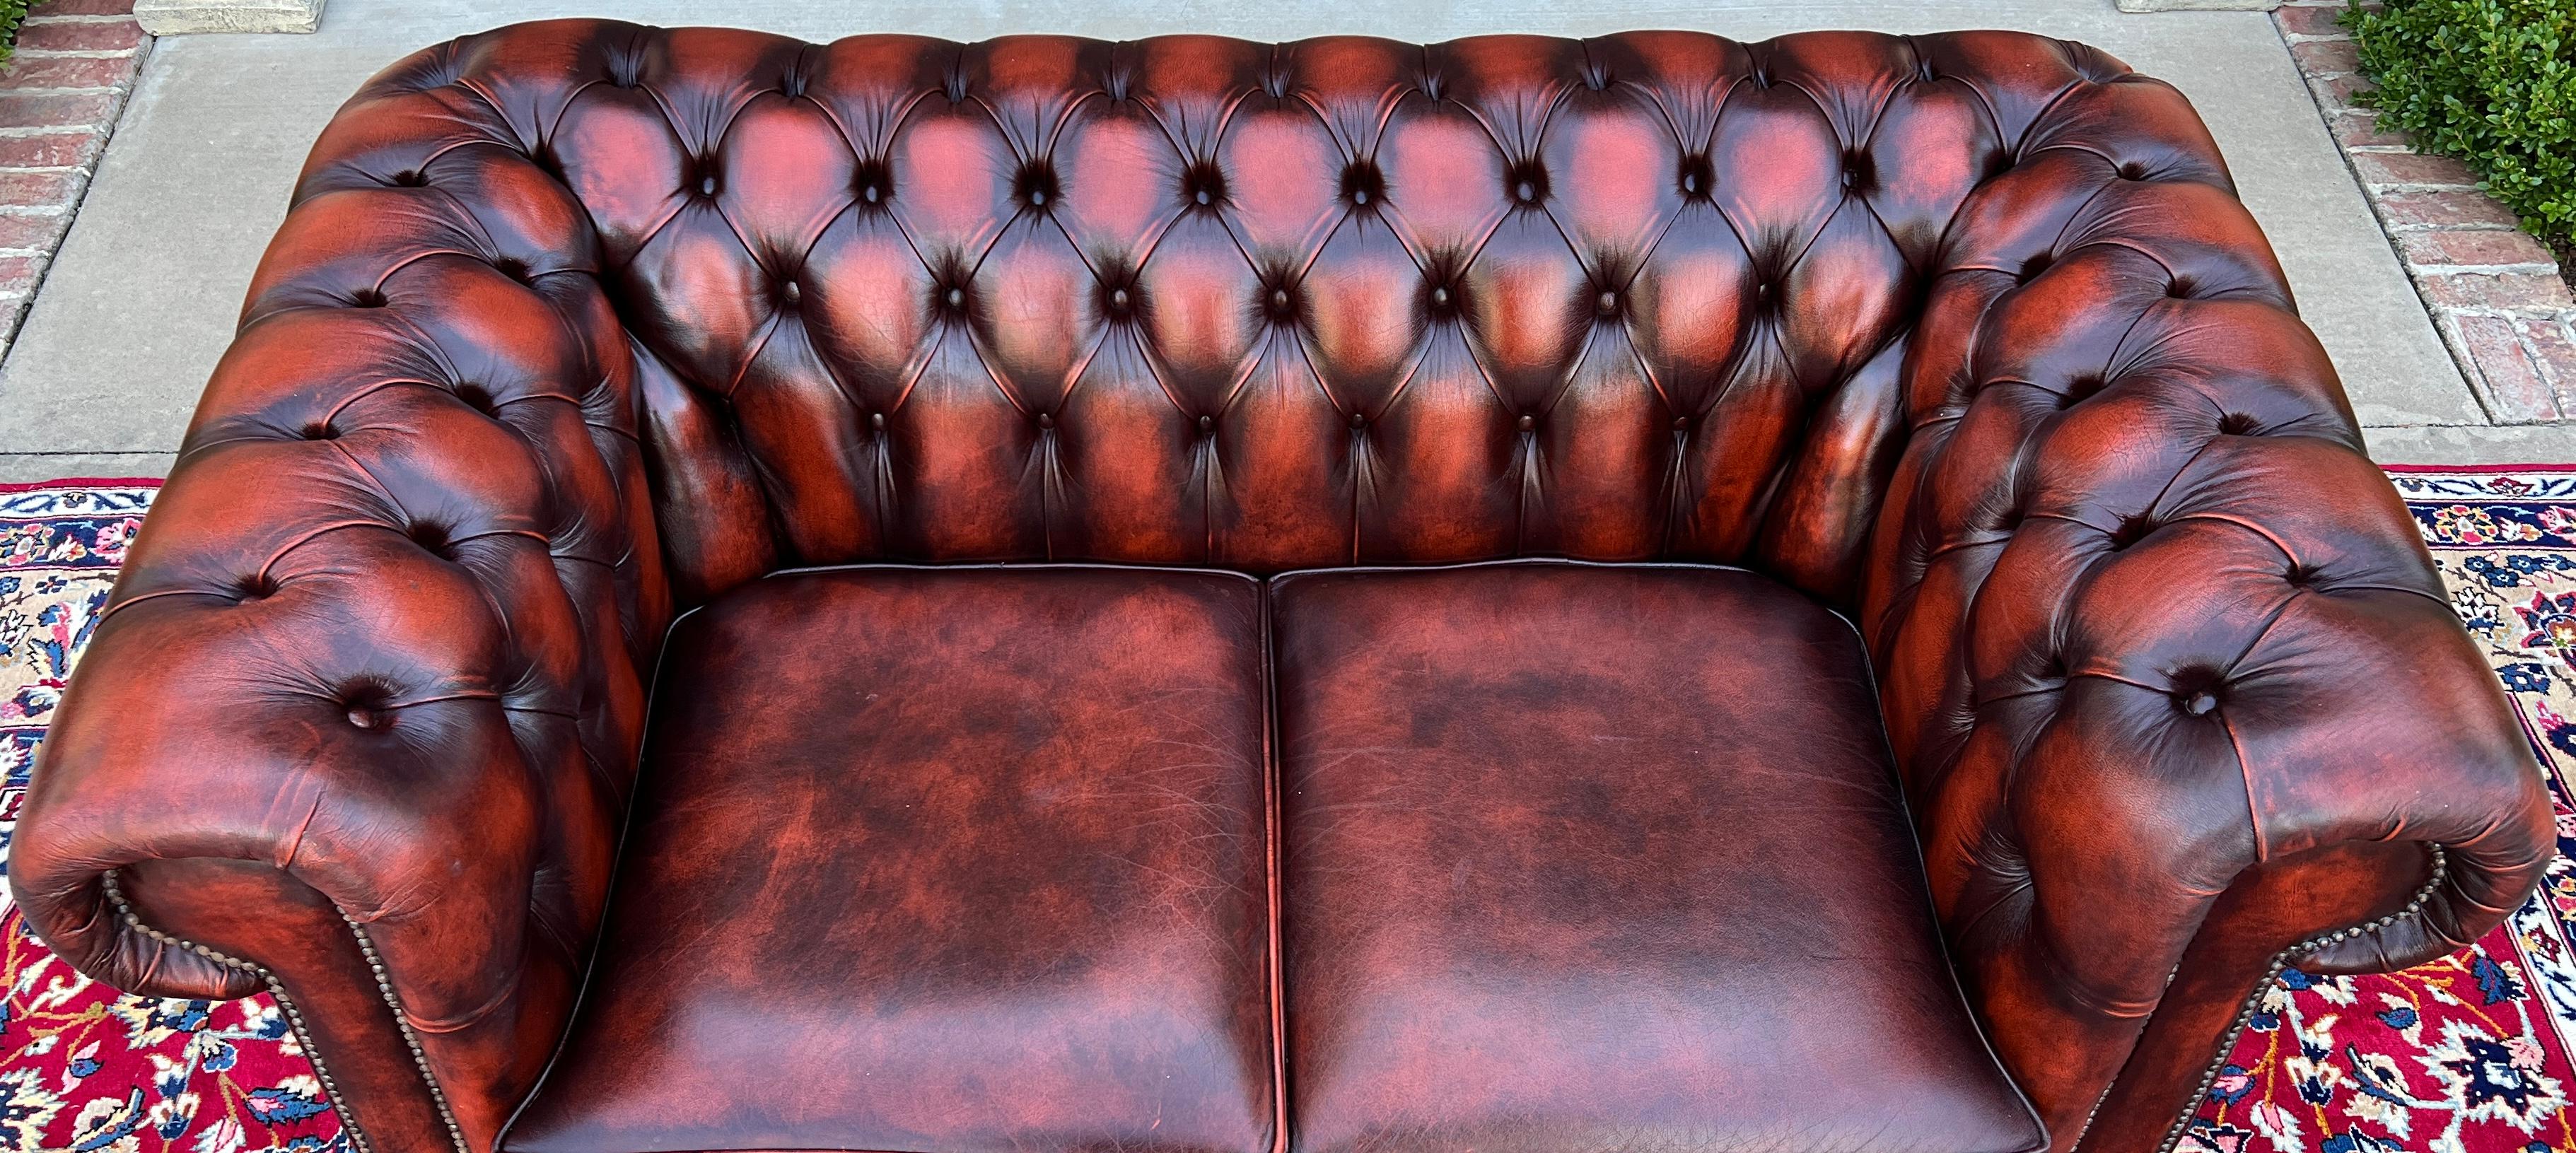 Vintage English Chesterfield Leather Tufted Love Seat Sofa Oxblood Red #2 For Sale 12